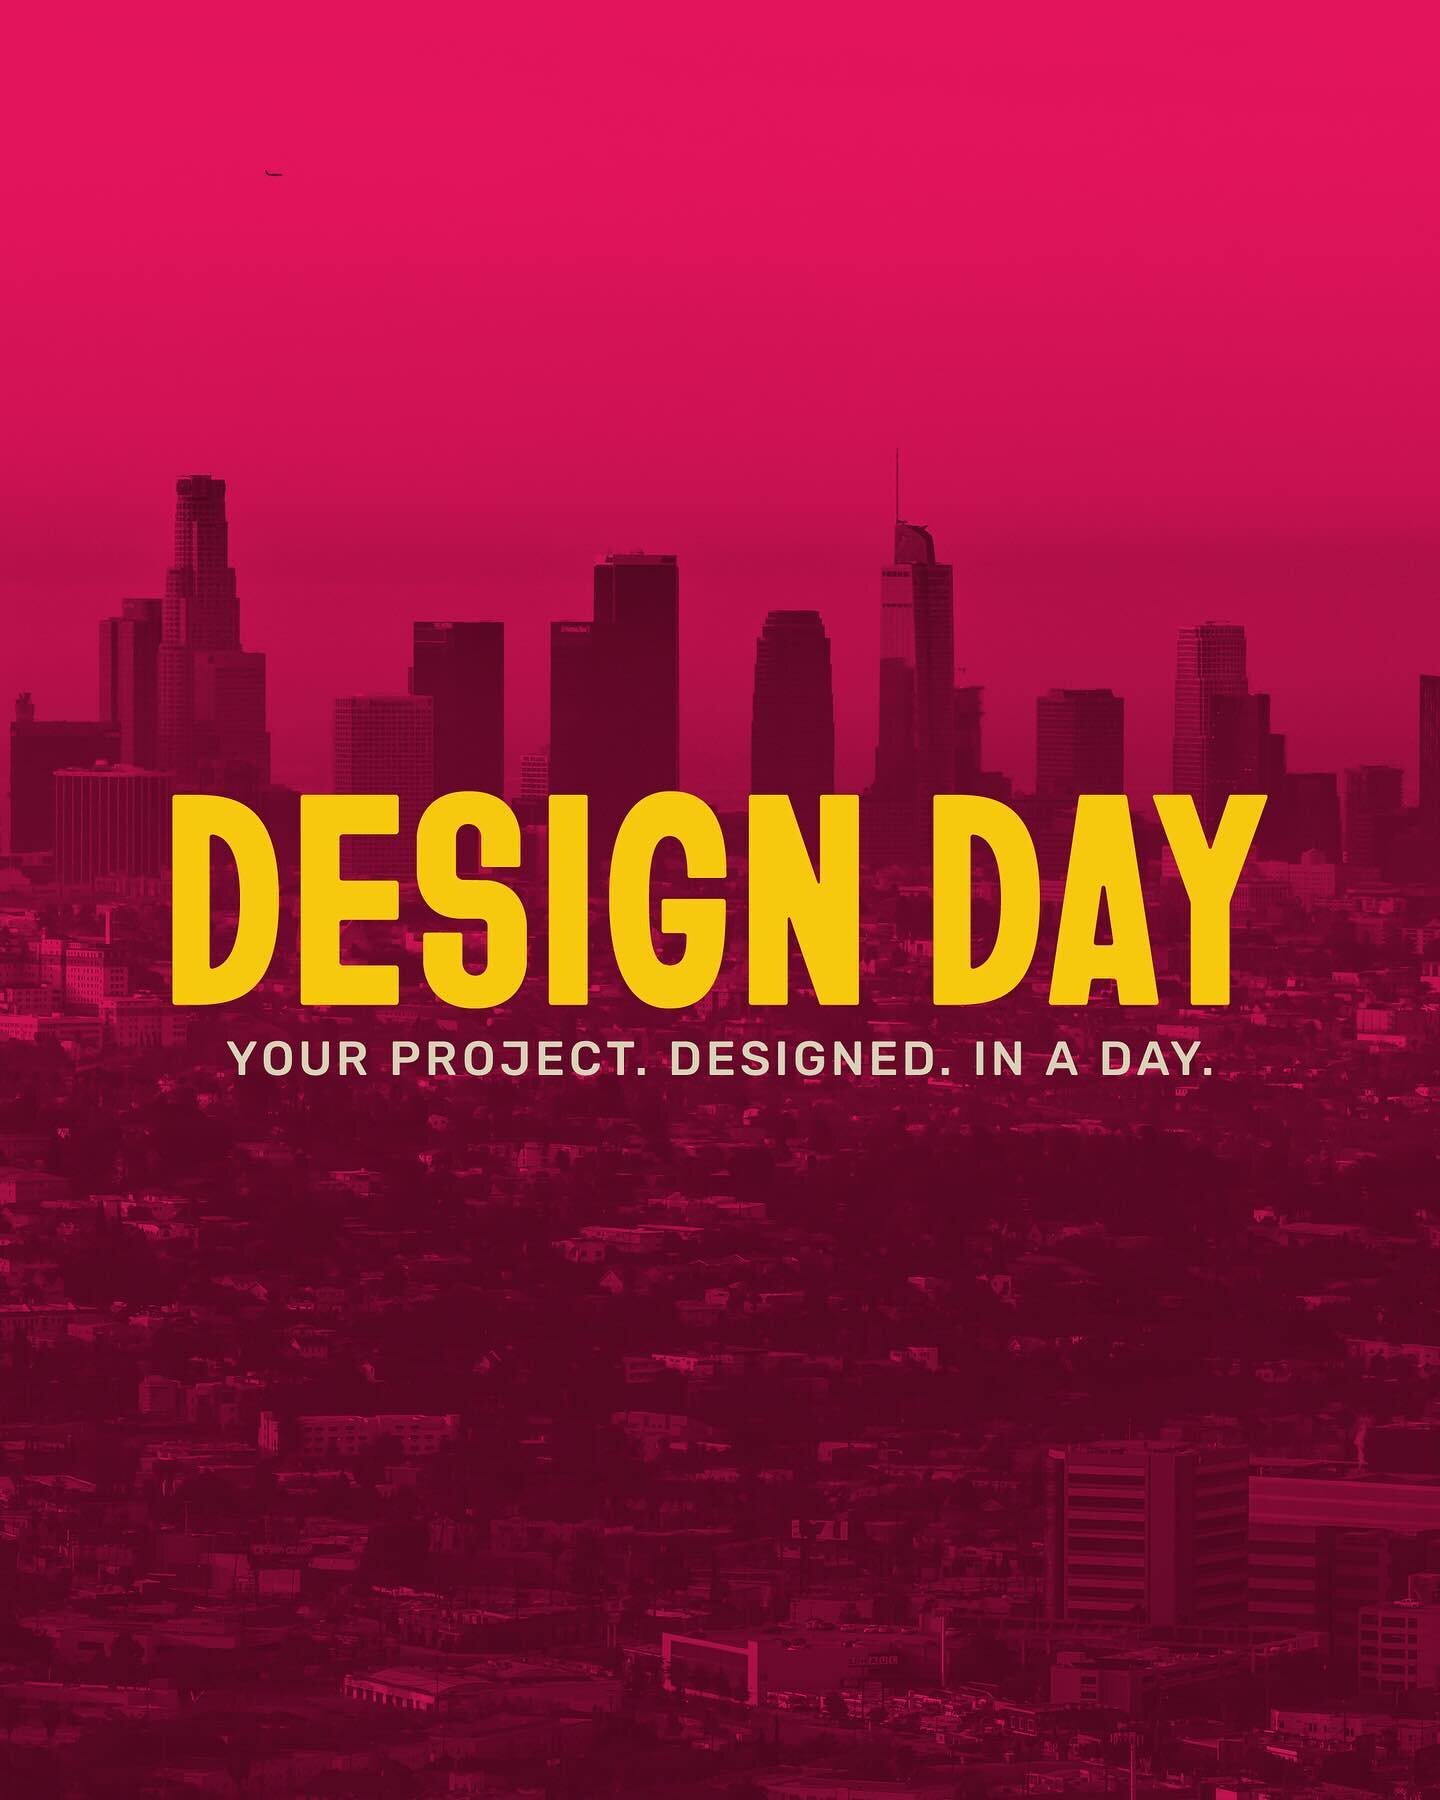 ✹ Say hello to Design Day!

Design is at the foundation of every project, communicating your essence and values before words are read. With over a decade of design mastery, I ensure our Design Day is efficient and effective, propelling your project f